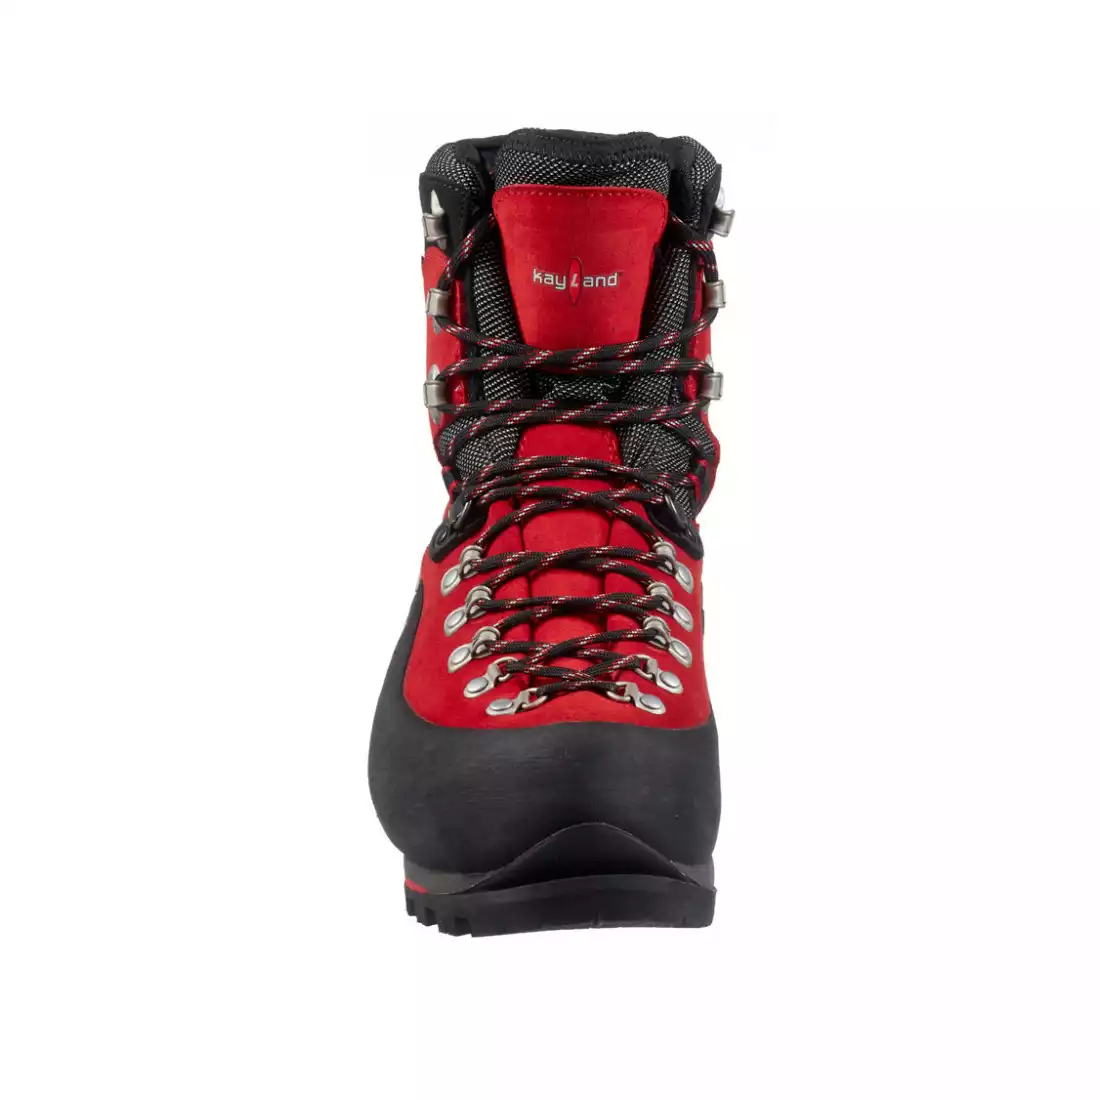 KAYLAND SUPER ICE EVO GTX Men's hiking shoes in high mountains, GORE-TEX, VIBRAM, red-black